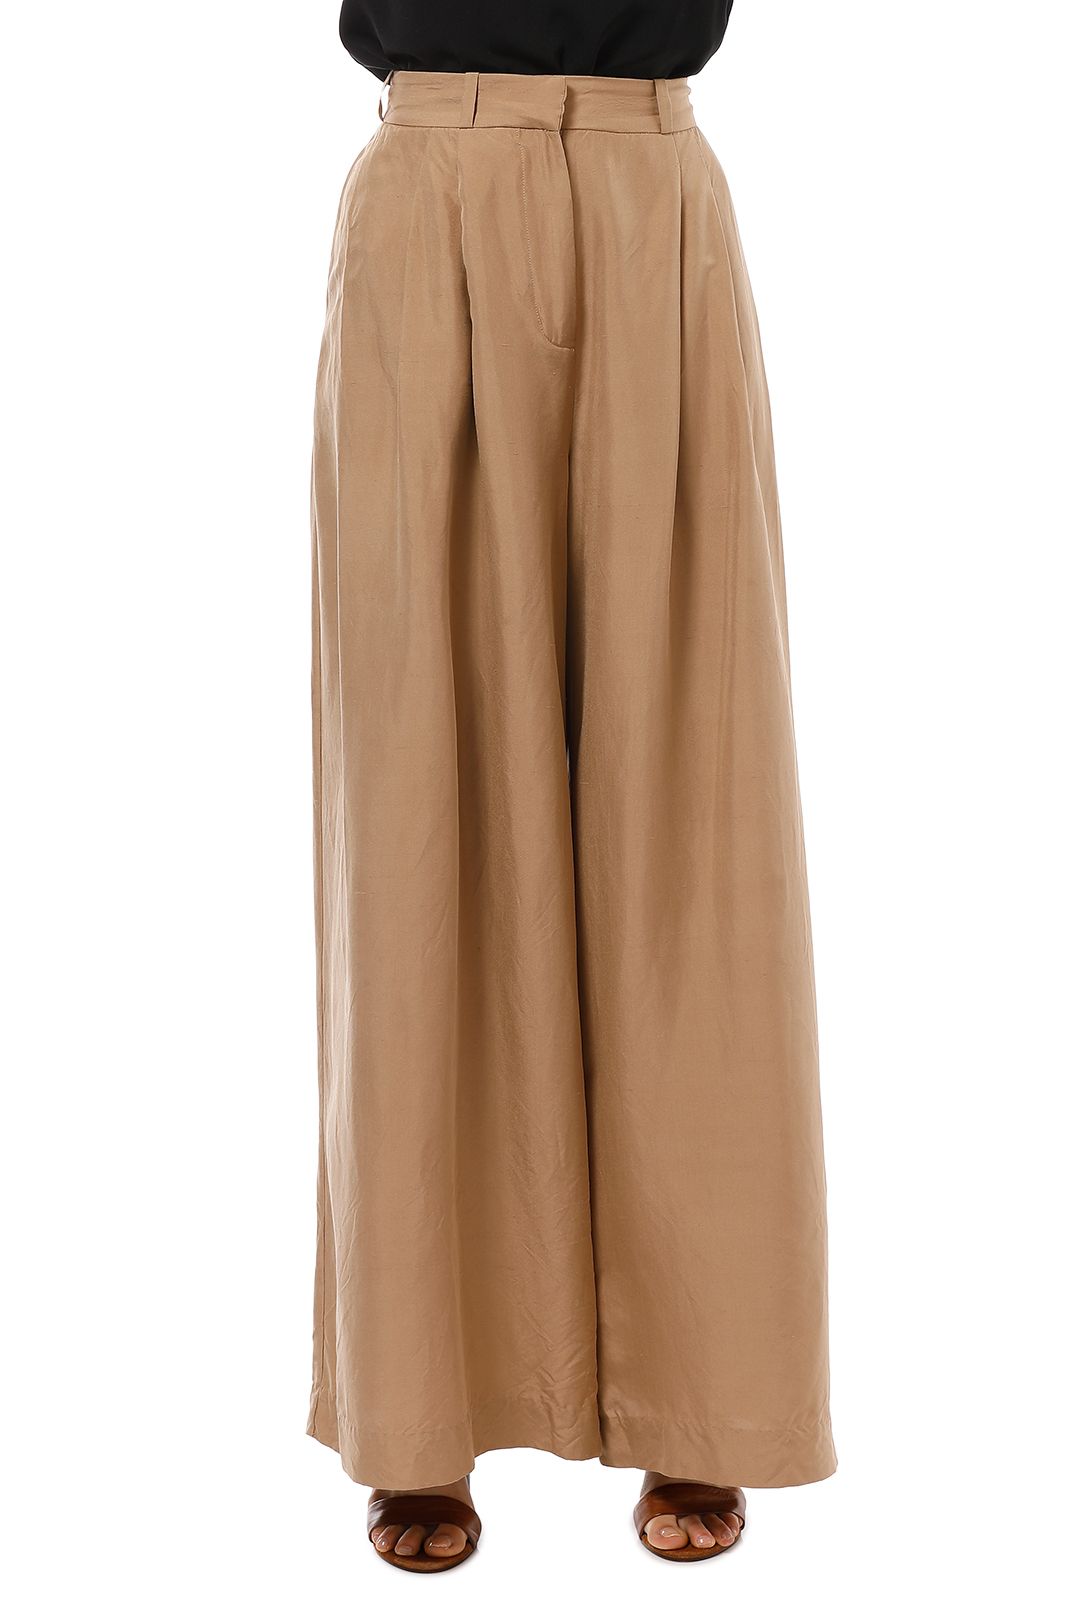 Unbridled Wide Leg Pant by Zimmermann for Rent